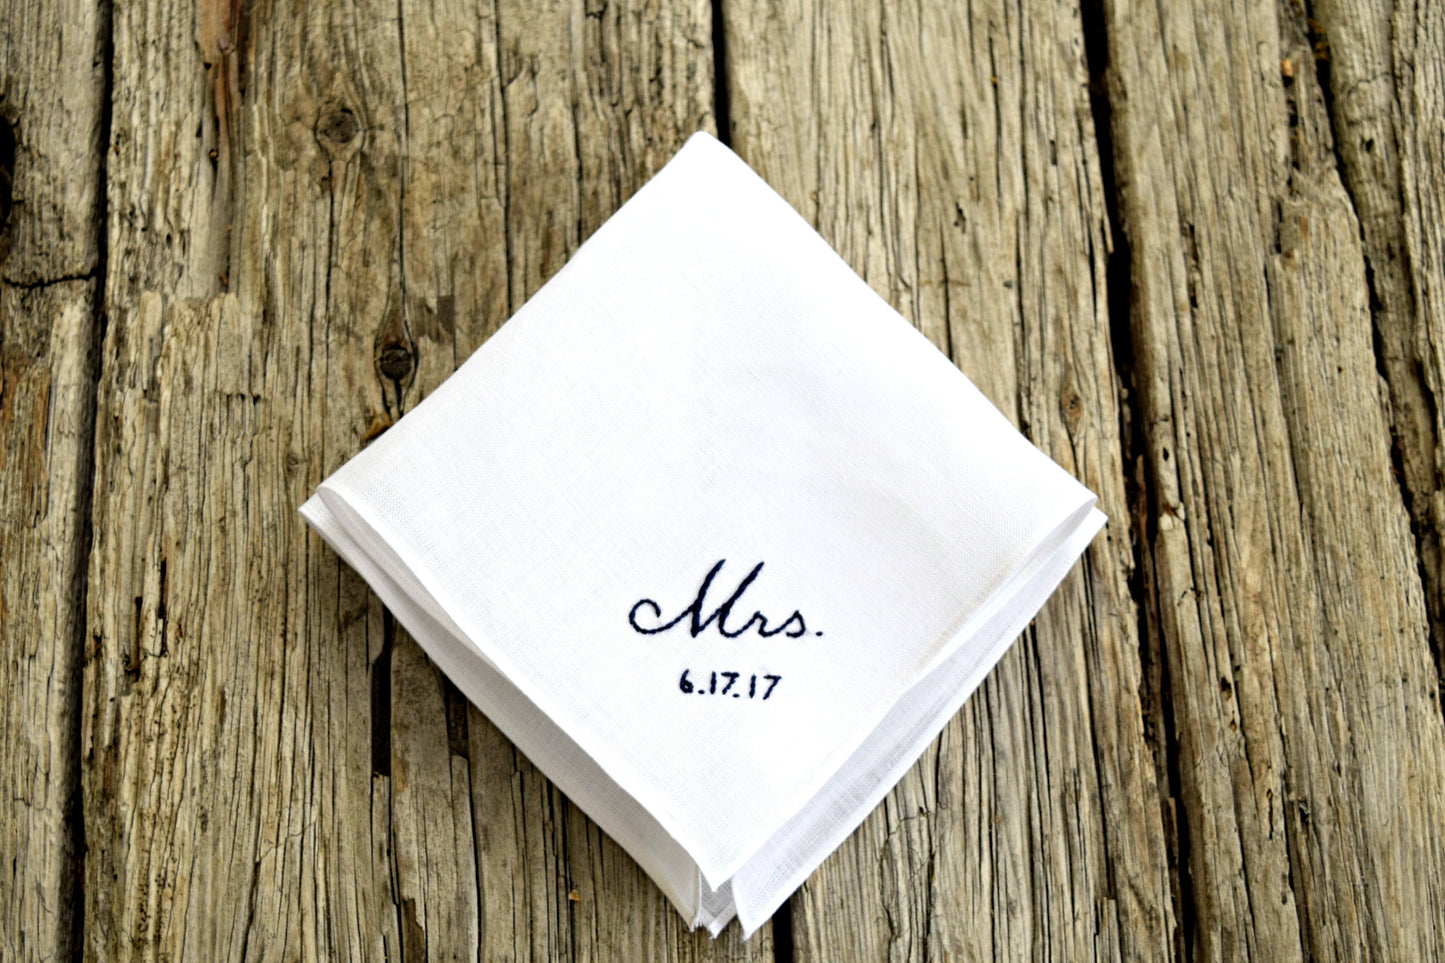 Irish linen handkerchief hand embroidered with Mrs. and wedding date in black